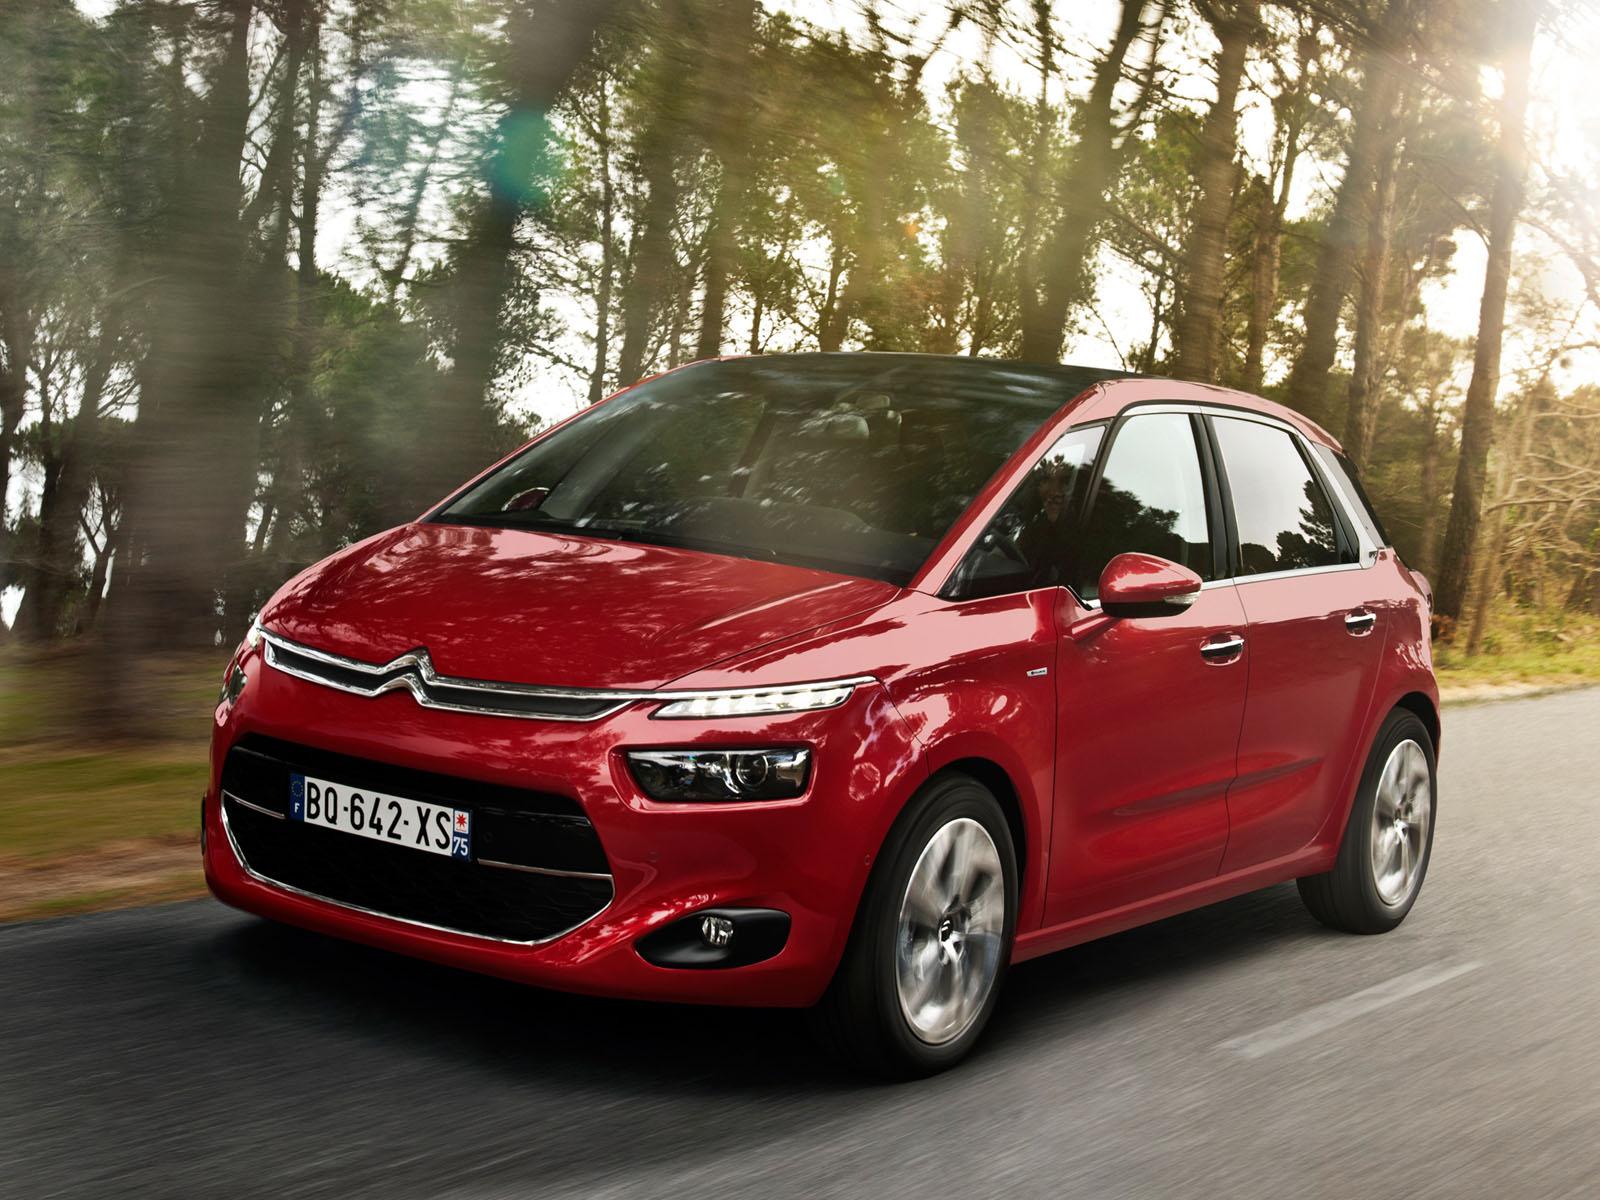 Citroen C4 Picasso (2013) first official pictures